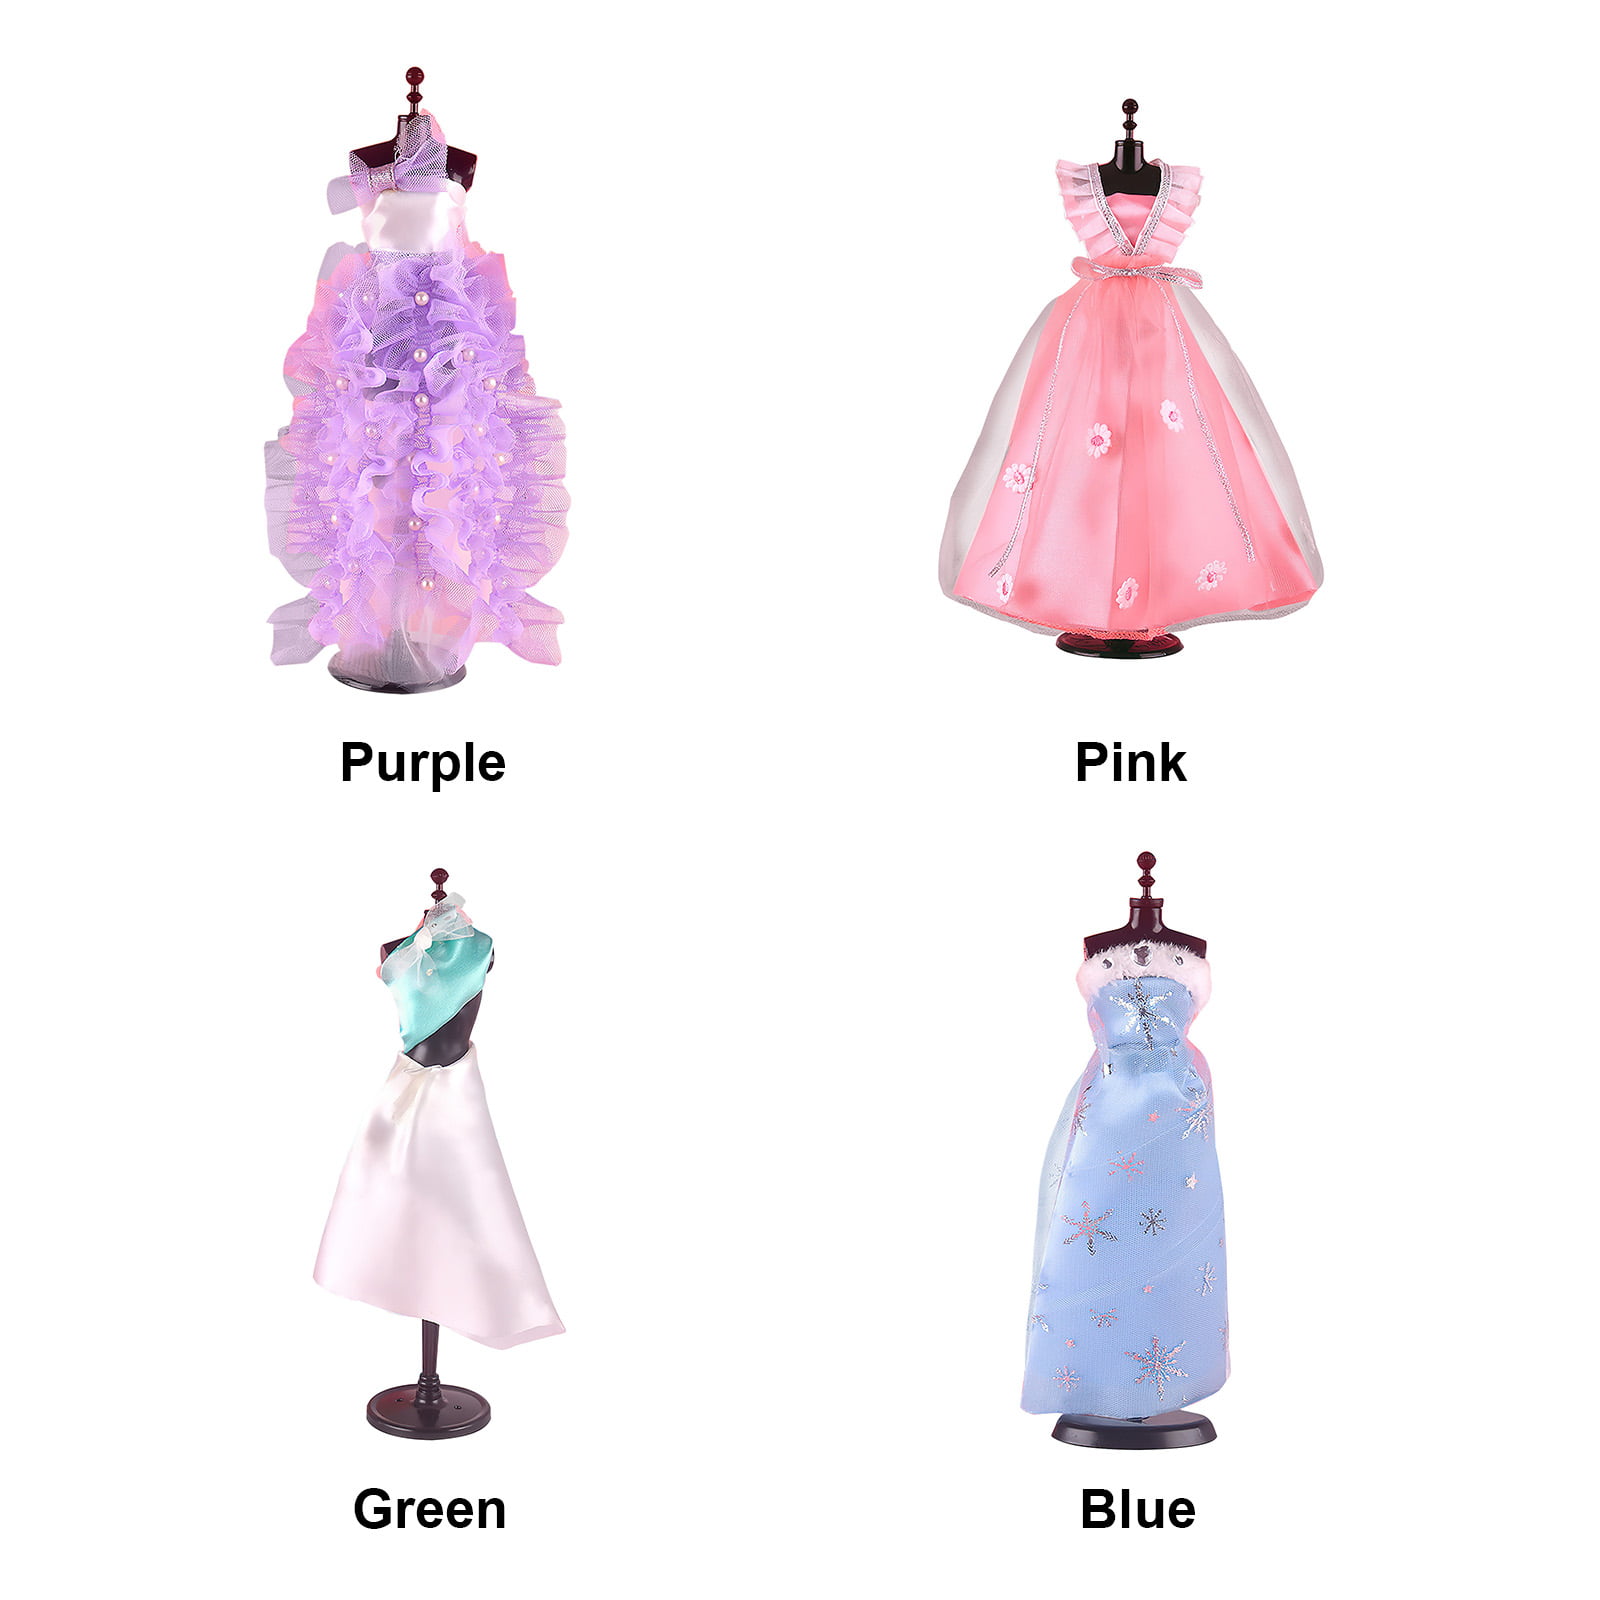 Kids Fashion Designer Kit Arts and Crafts Doll Clothes Dress for Teen Kids